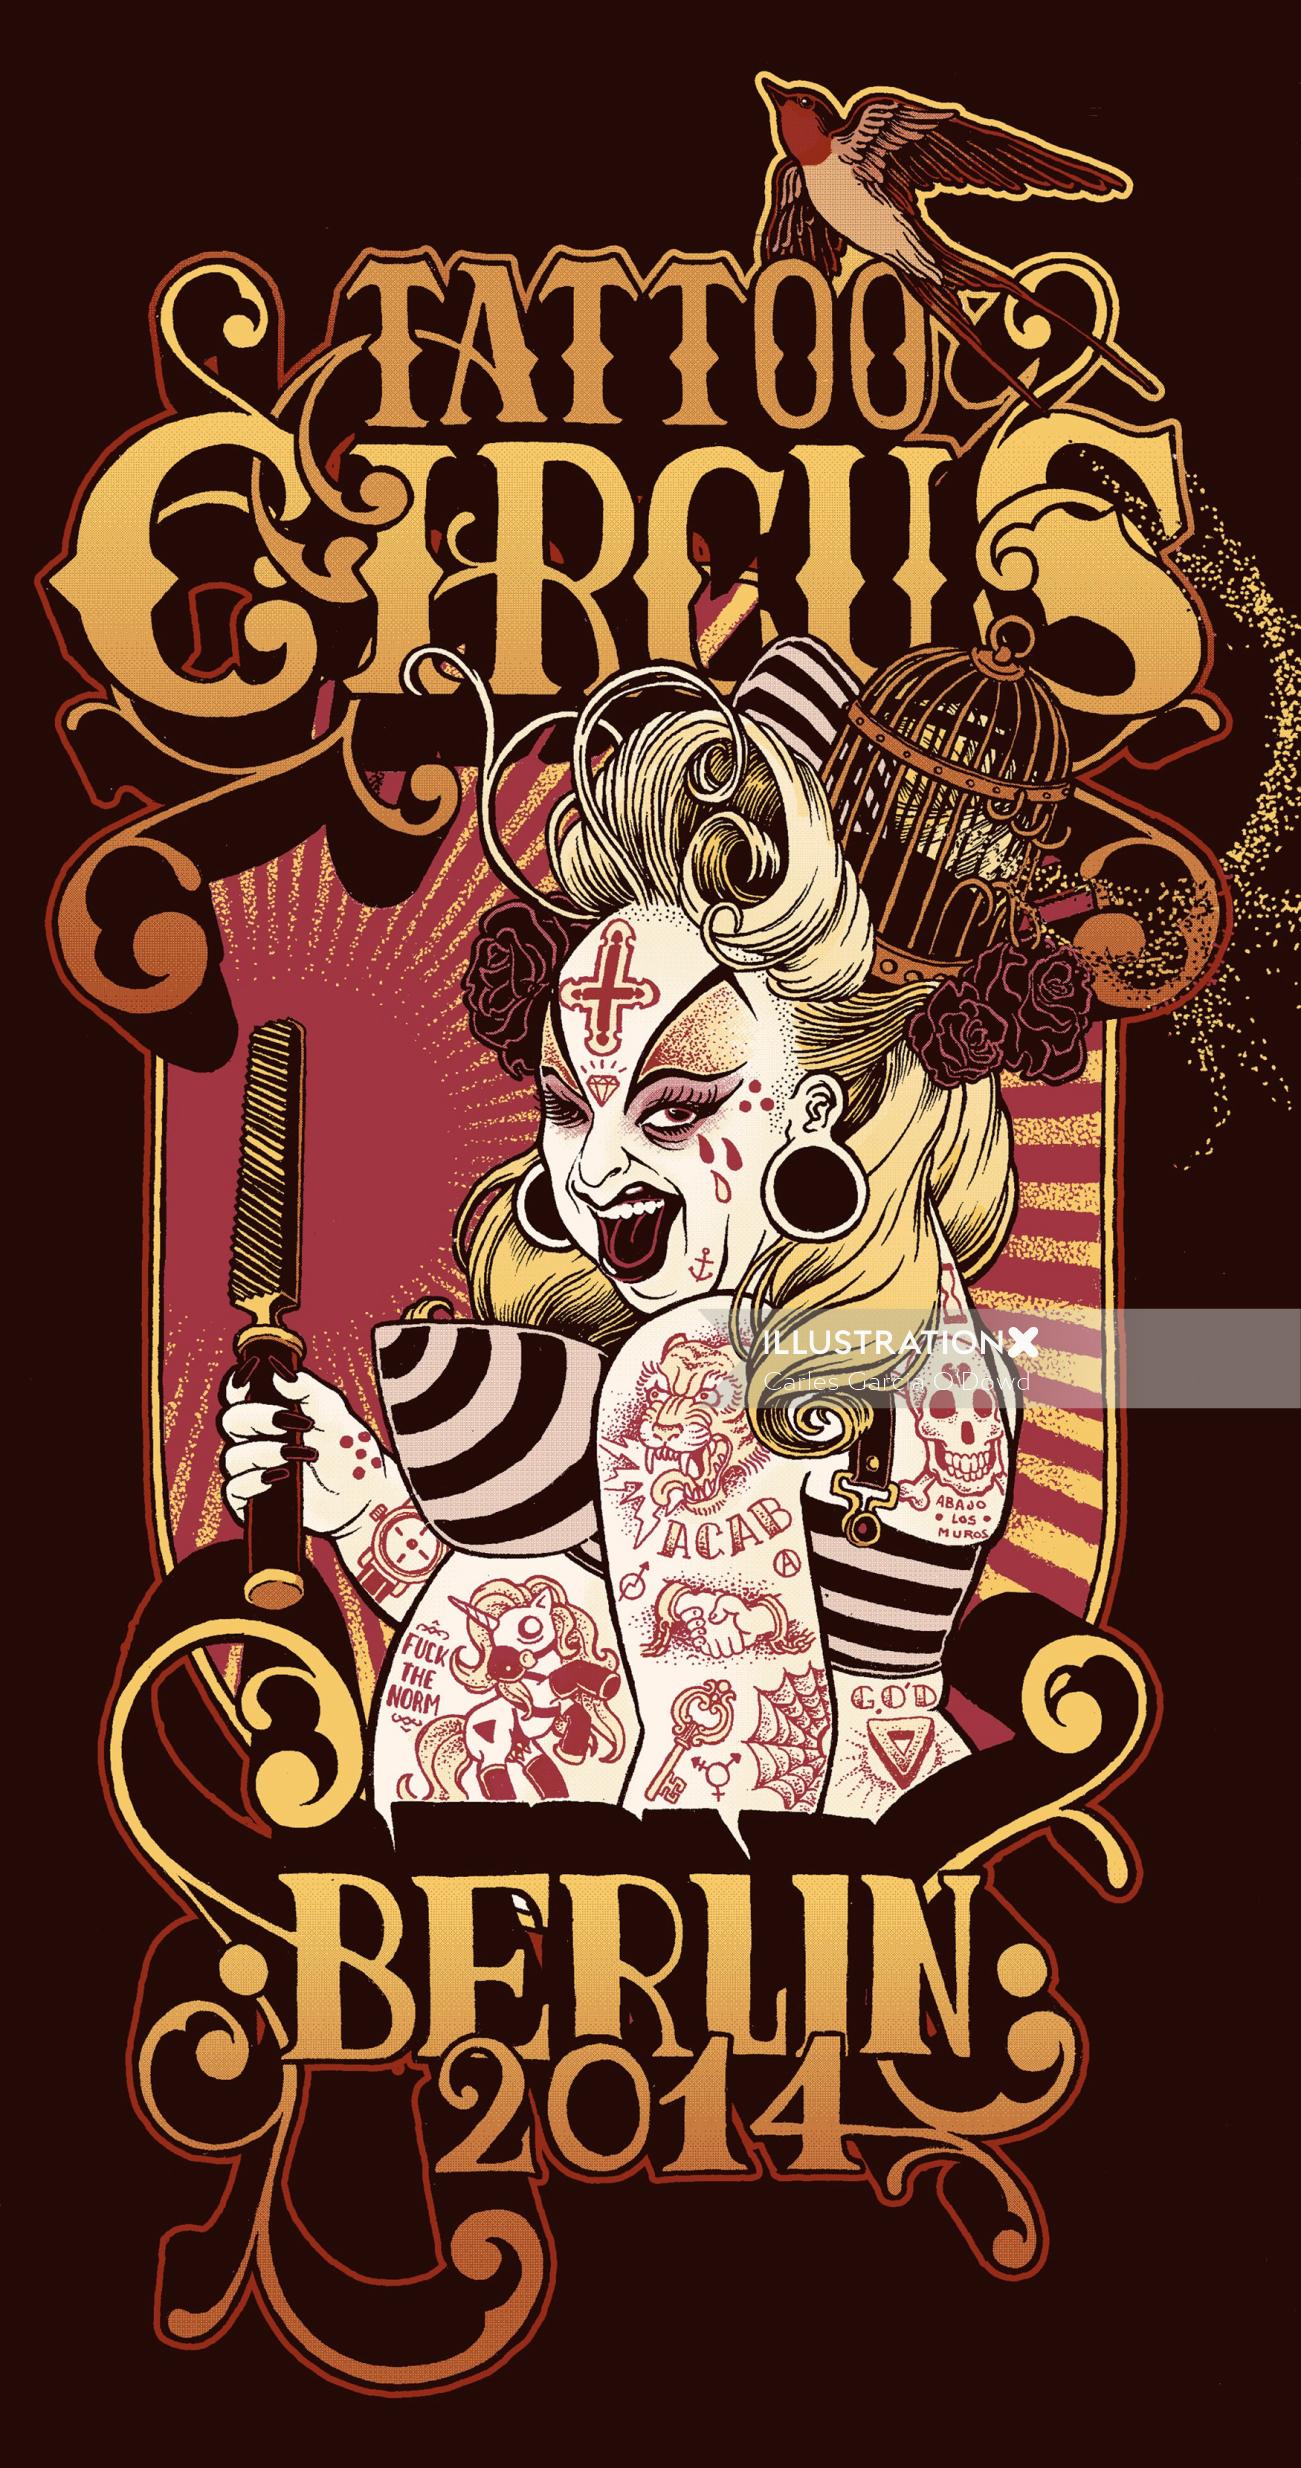 Affiche pour le Berlin Tattoo Circus 2014